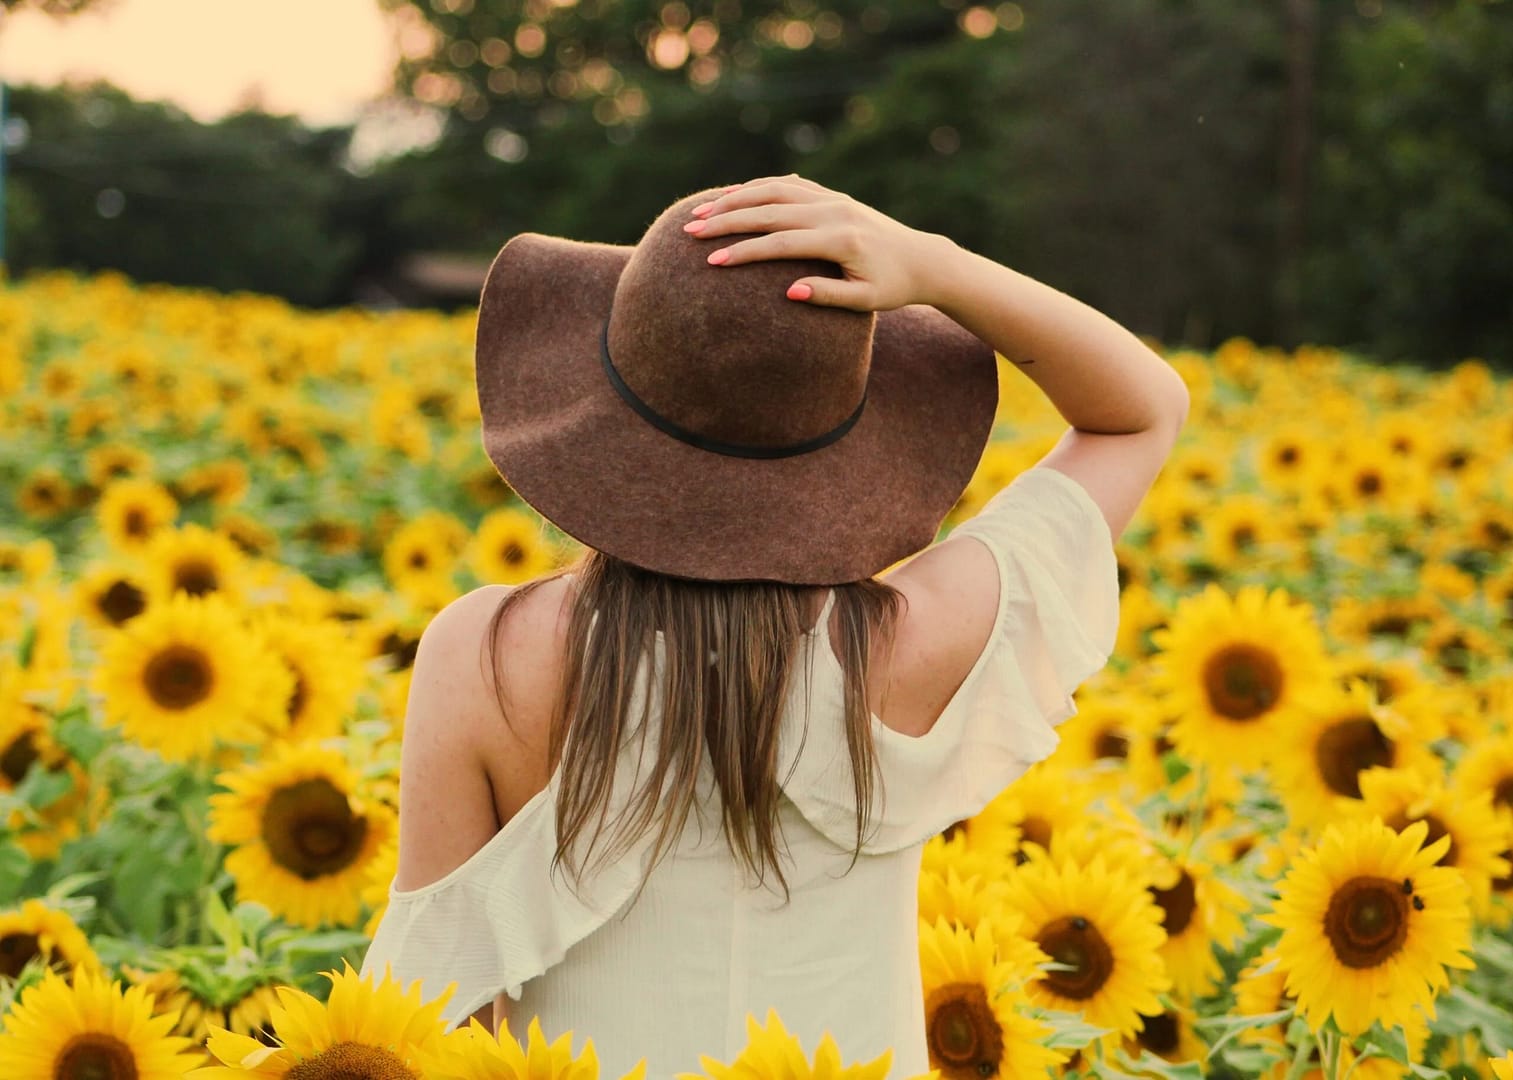 Sunflower Microgreen Shoots, girl with back to us standing in front of sunflowers